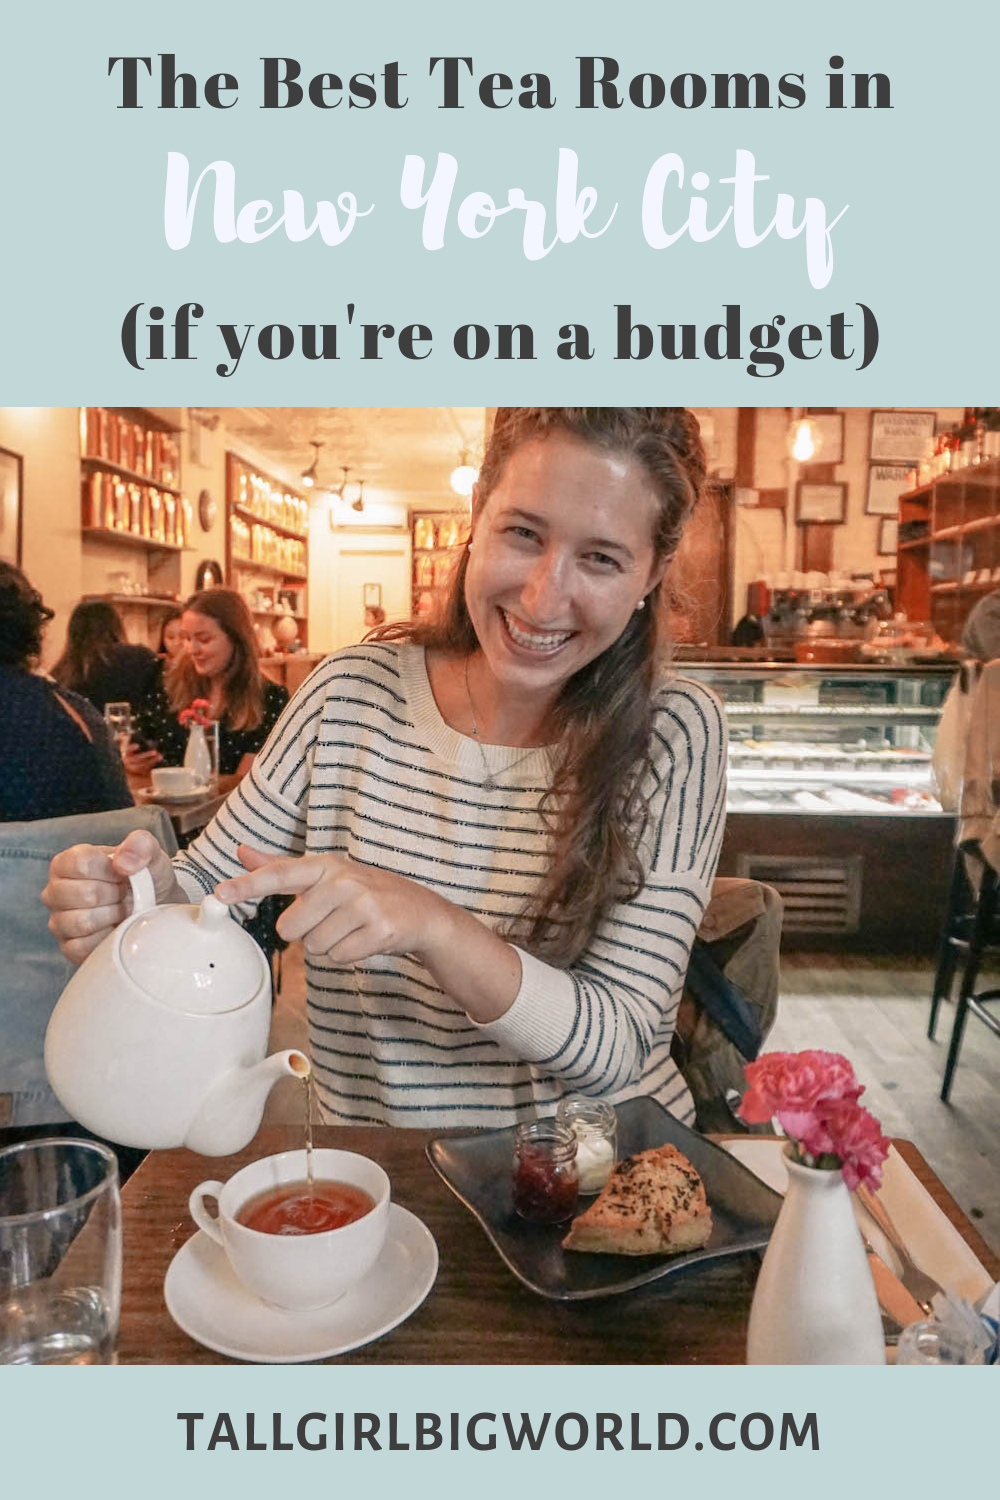 Many of the tea rooms in New York are incredibly expensive and have a dress code. Here are some of the best NYC tea rooms for budget travelers! #tea #nyc #newyork #newyorkcity #newyorknewyork #teaparlor #budgettravel #bucketlist 